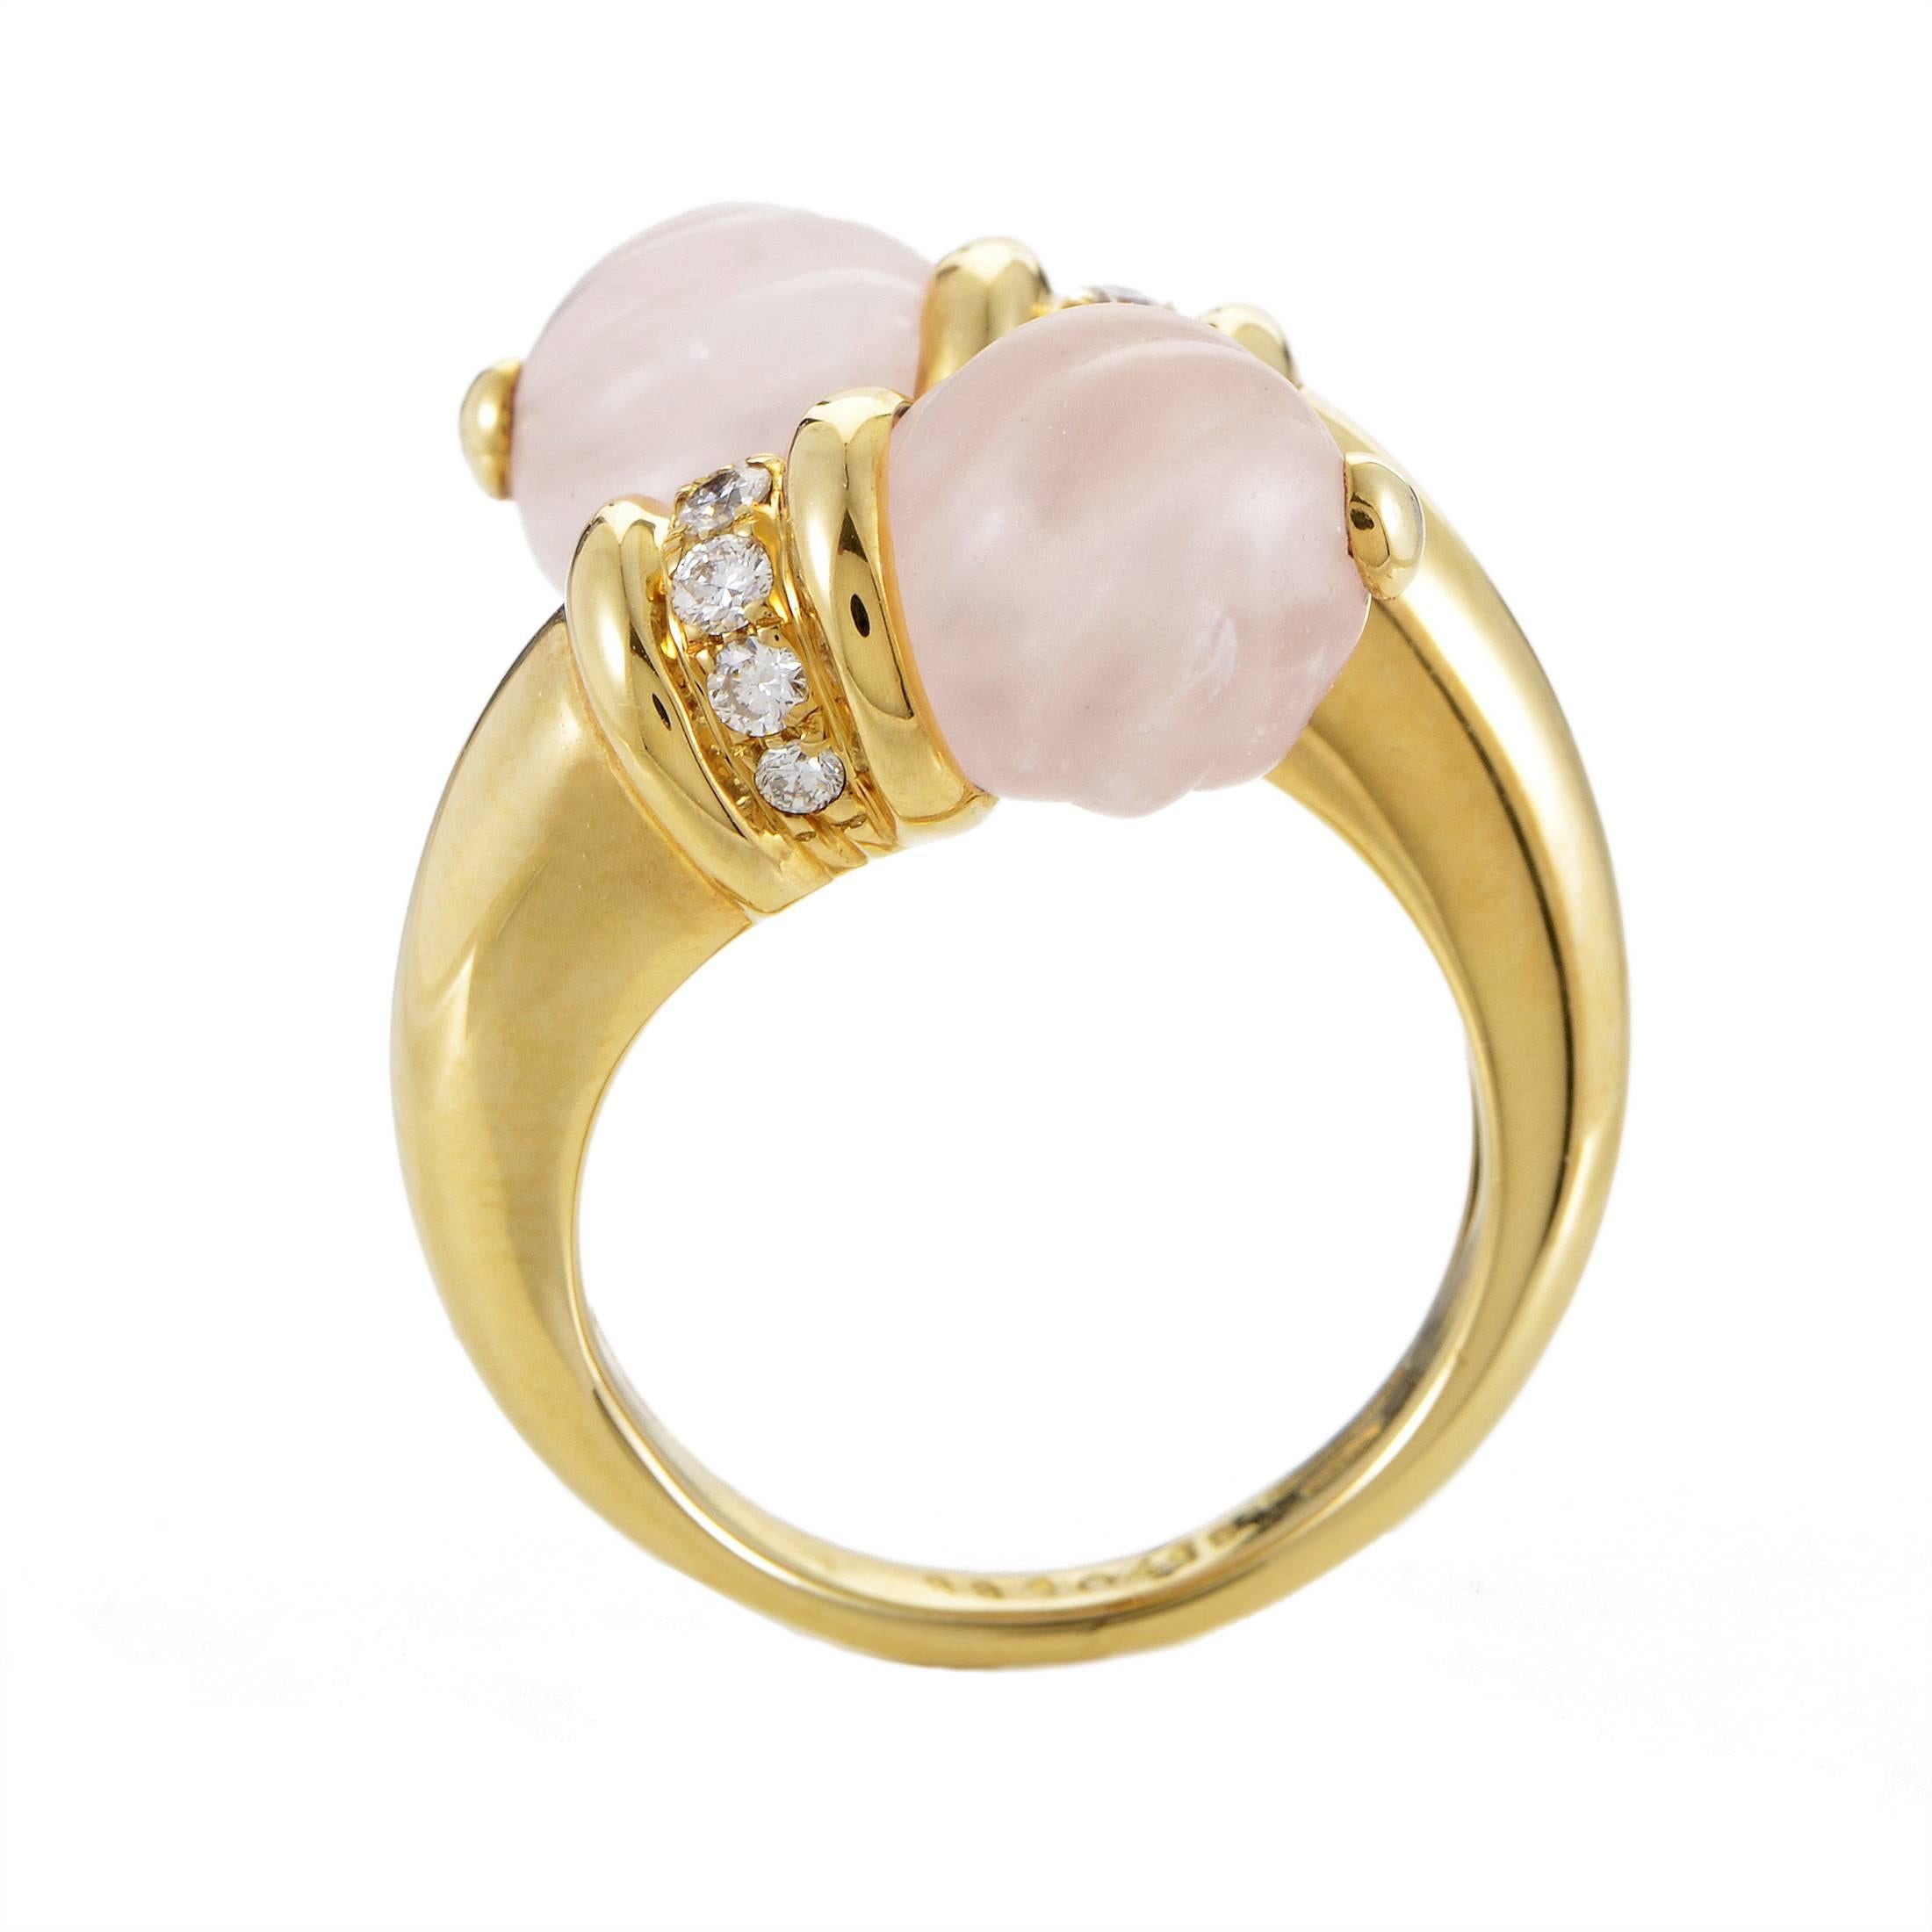 The immaculately gleaming surface of enchanting 18K yellow gold is brilliantly combined with delightful pastel nuance of marvelously shaped pink crystals in this gorgeous ring from Boucheron while glittering diamonds totaling 0.20ct add a touch of